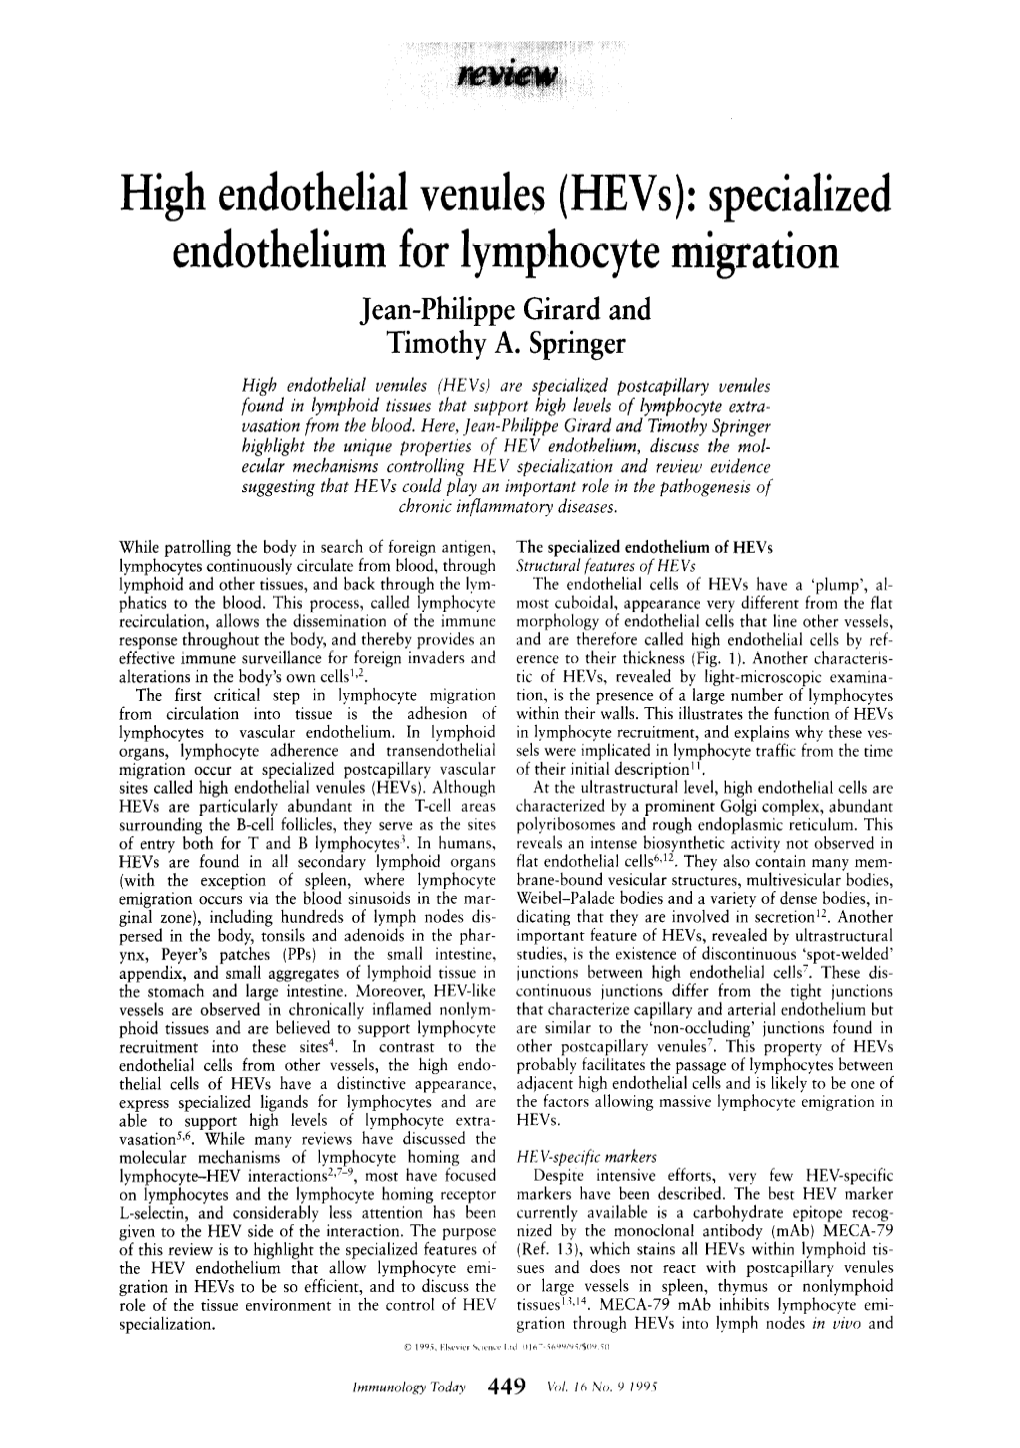 High Endothelial Venules (Hevs? Are Specialized Postcapillary Venules Found in Lymphoid Tissues That Support High Levels of Lymphocyte Extra- Vasation from the Blood